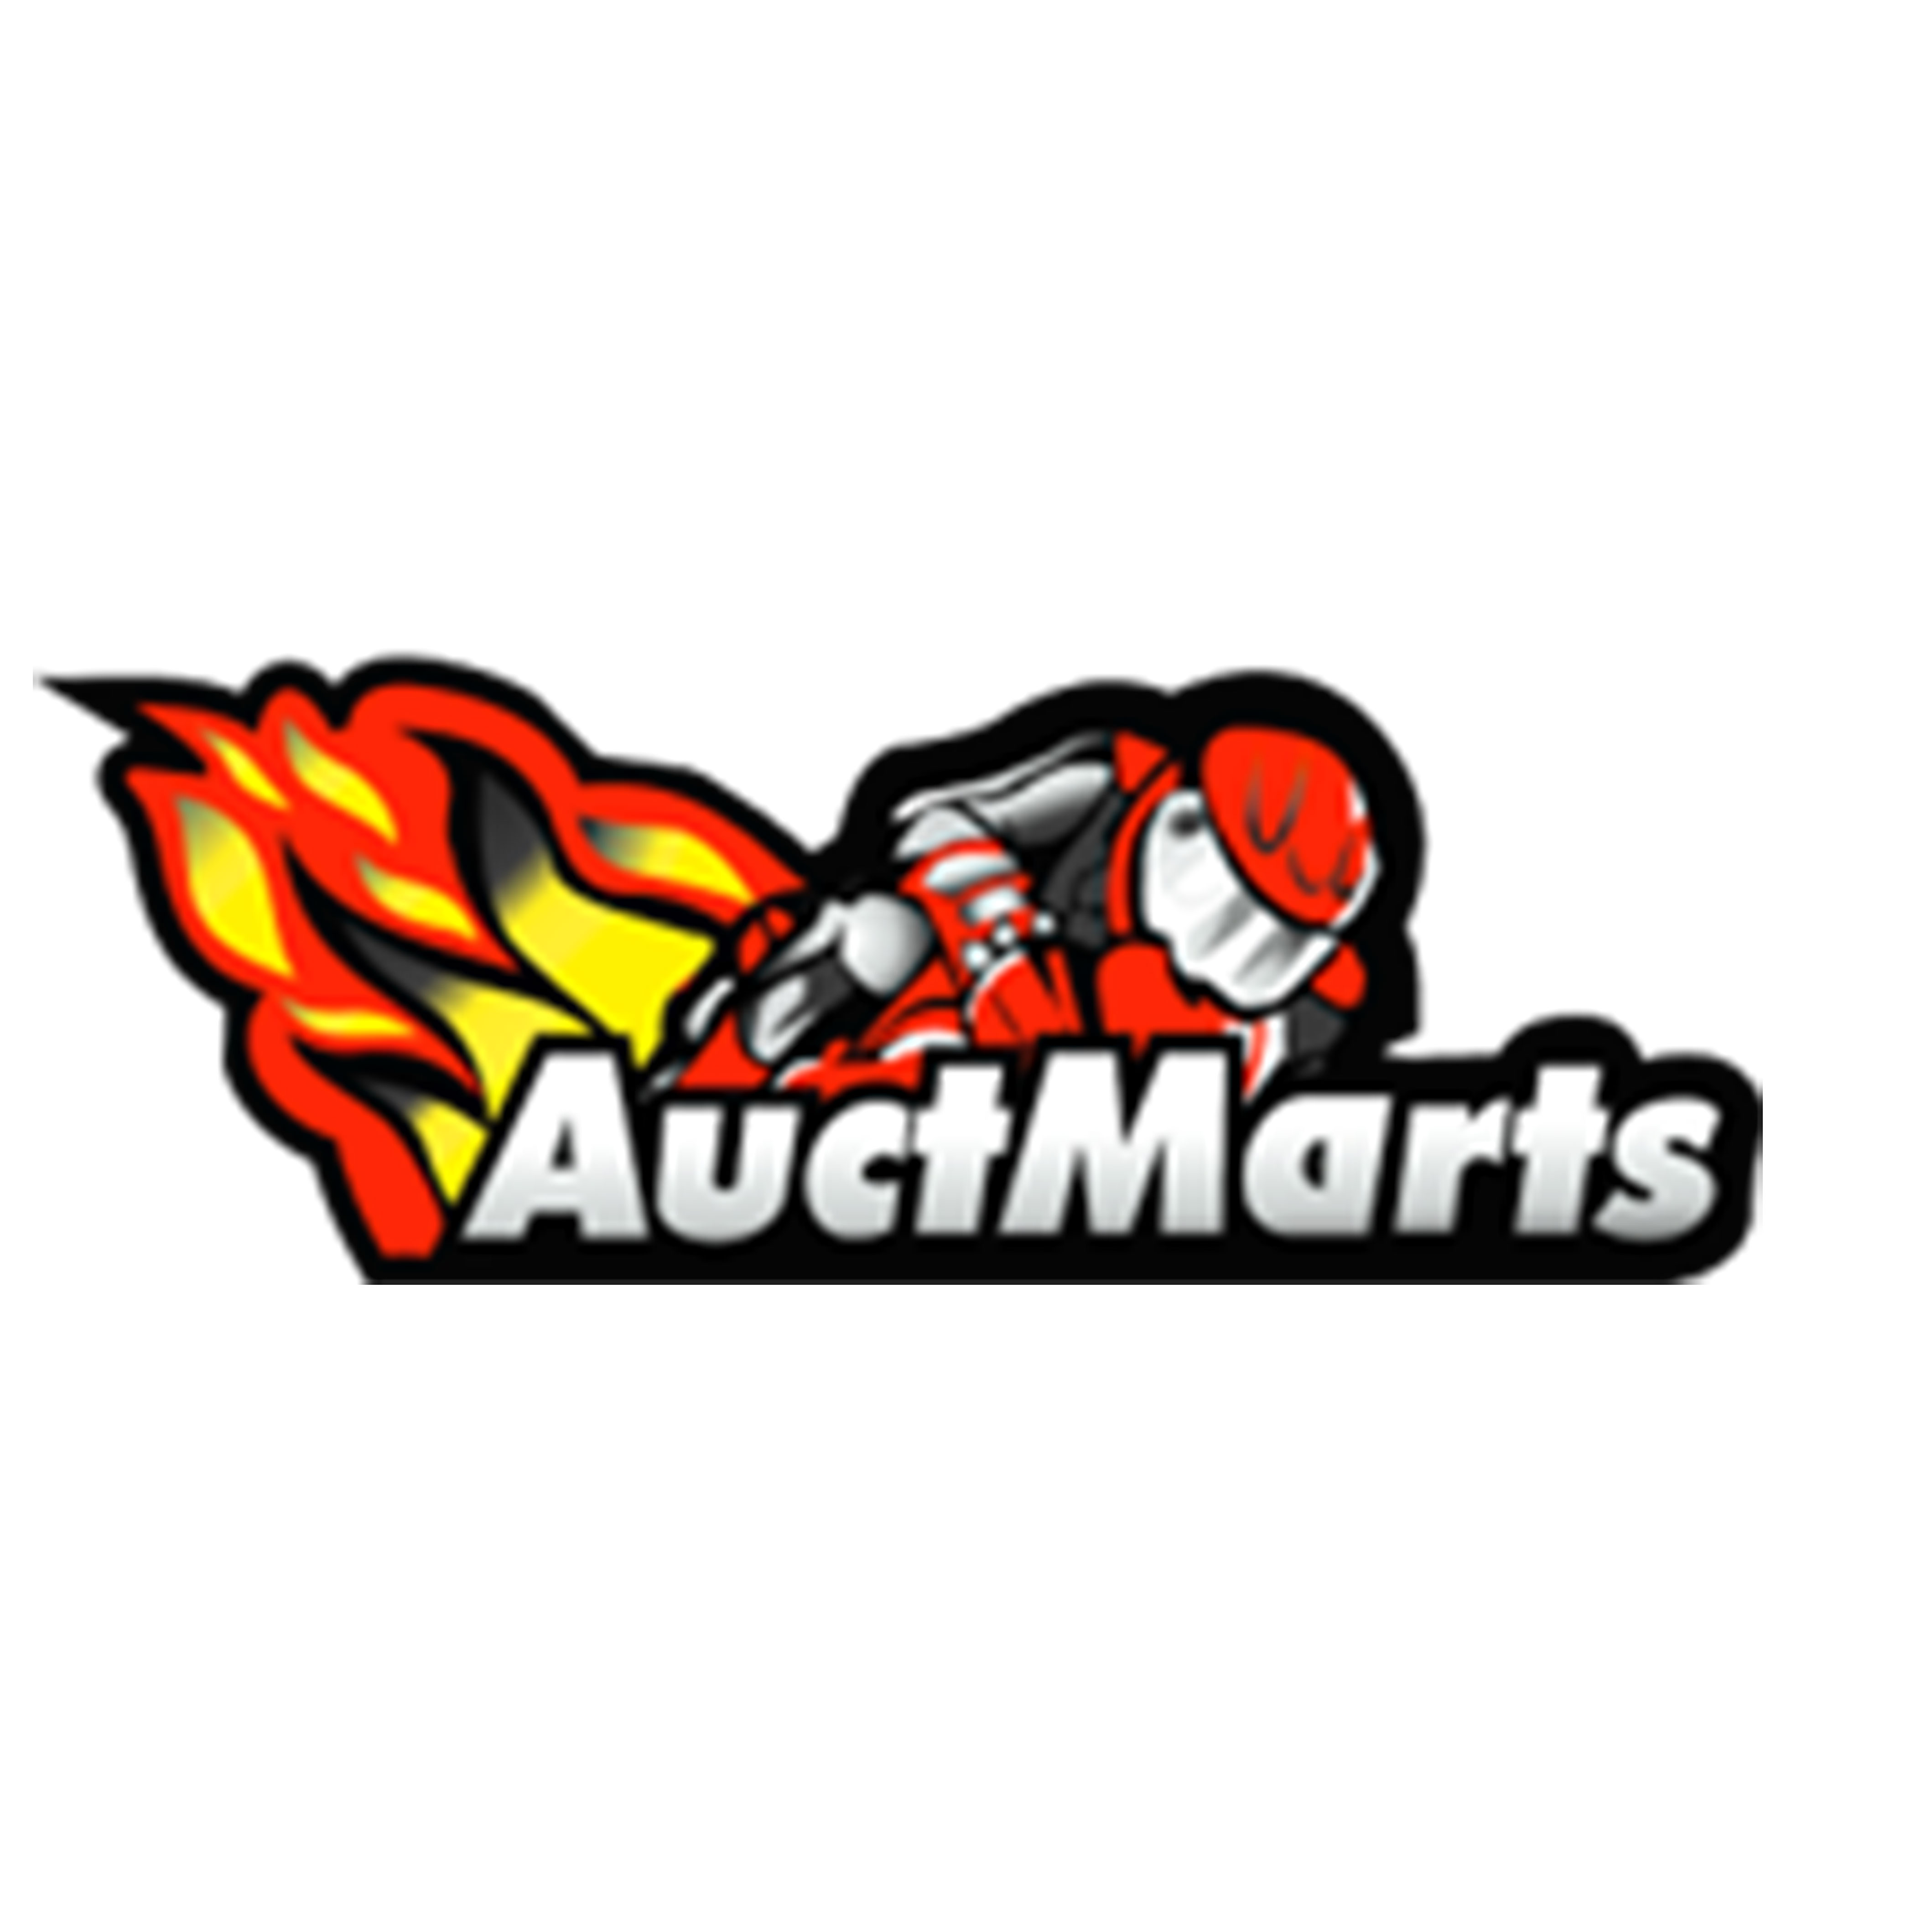 Auctmarts Trading promo codes